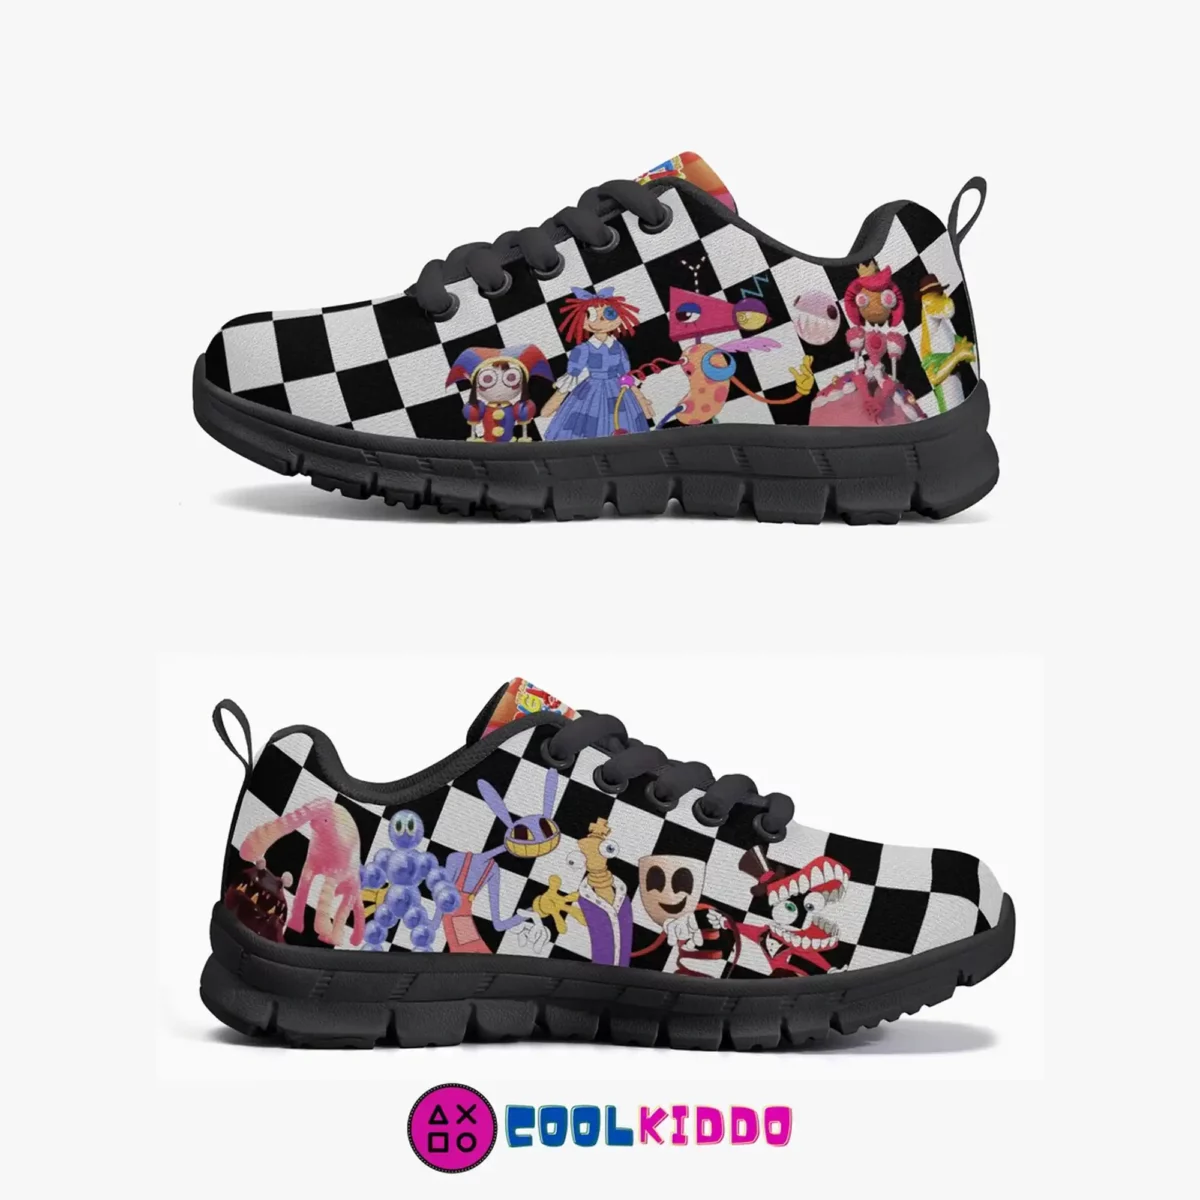 Personalized Shoes | The Amazing Digital Circus Animated Series Inspired Lightweight Mesh Sneakers Cool Kiddo 18